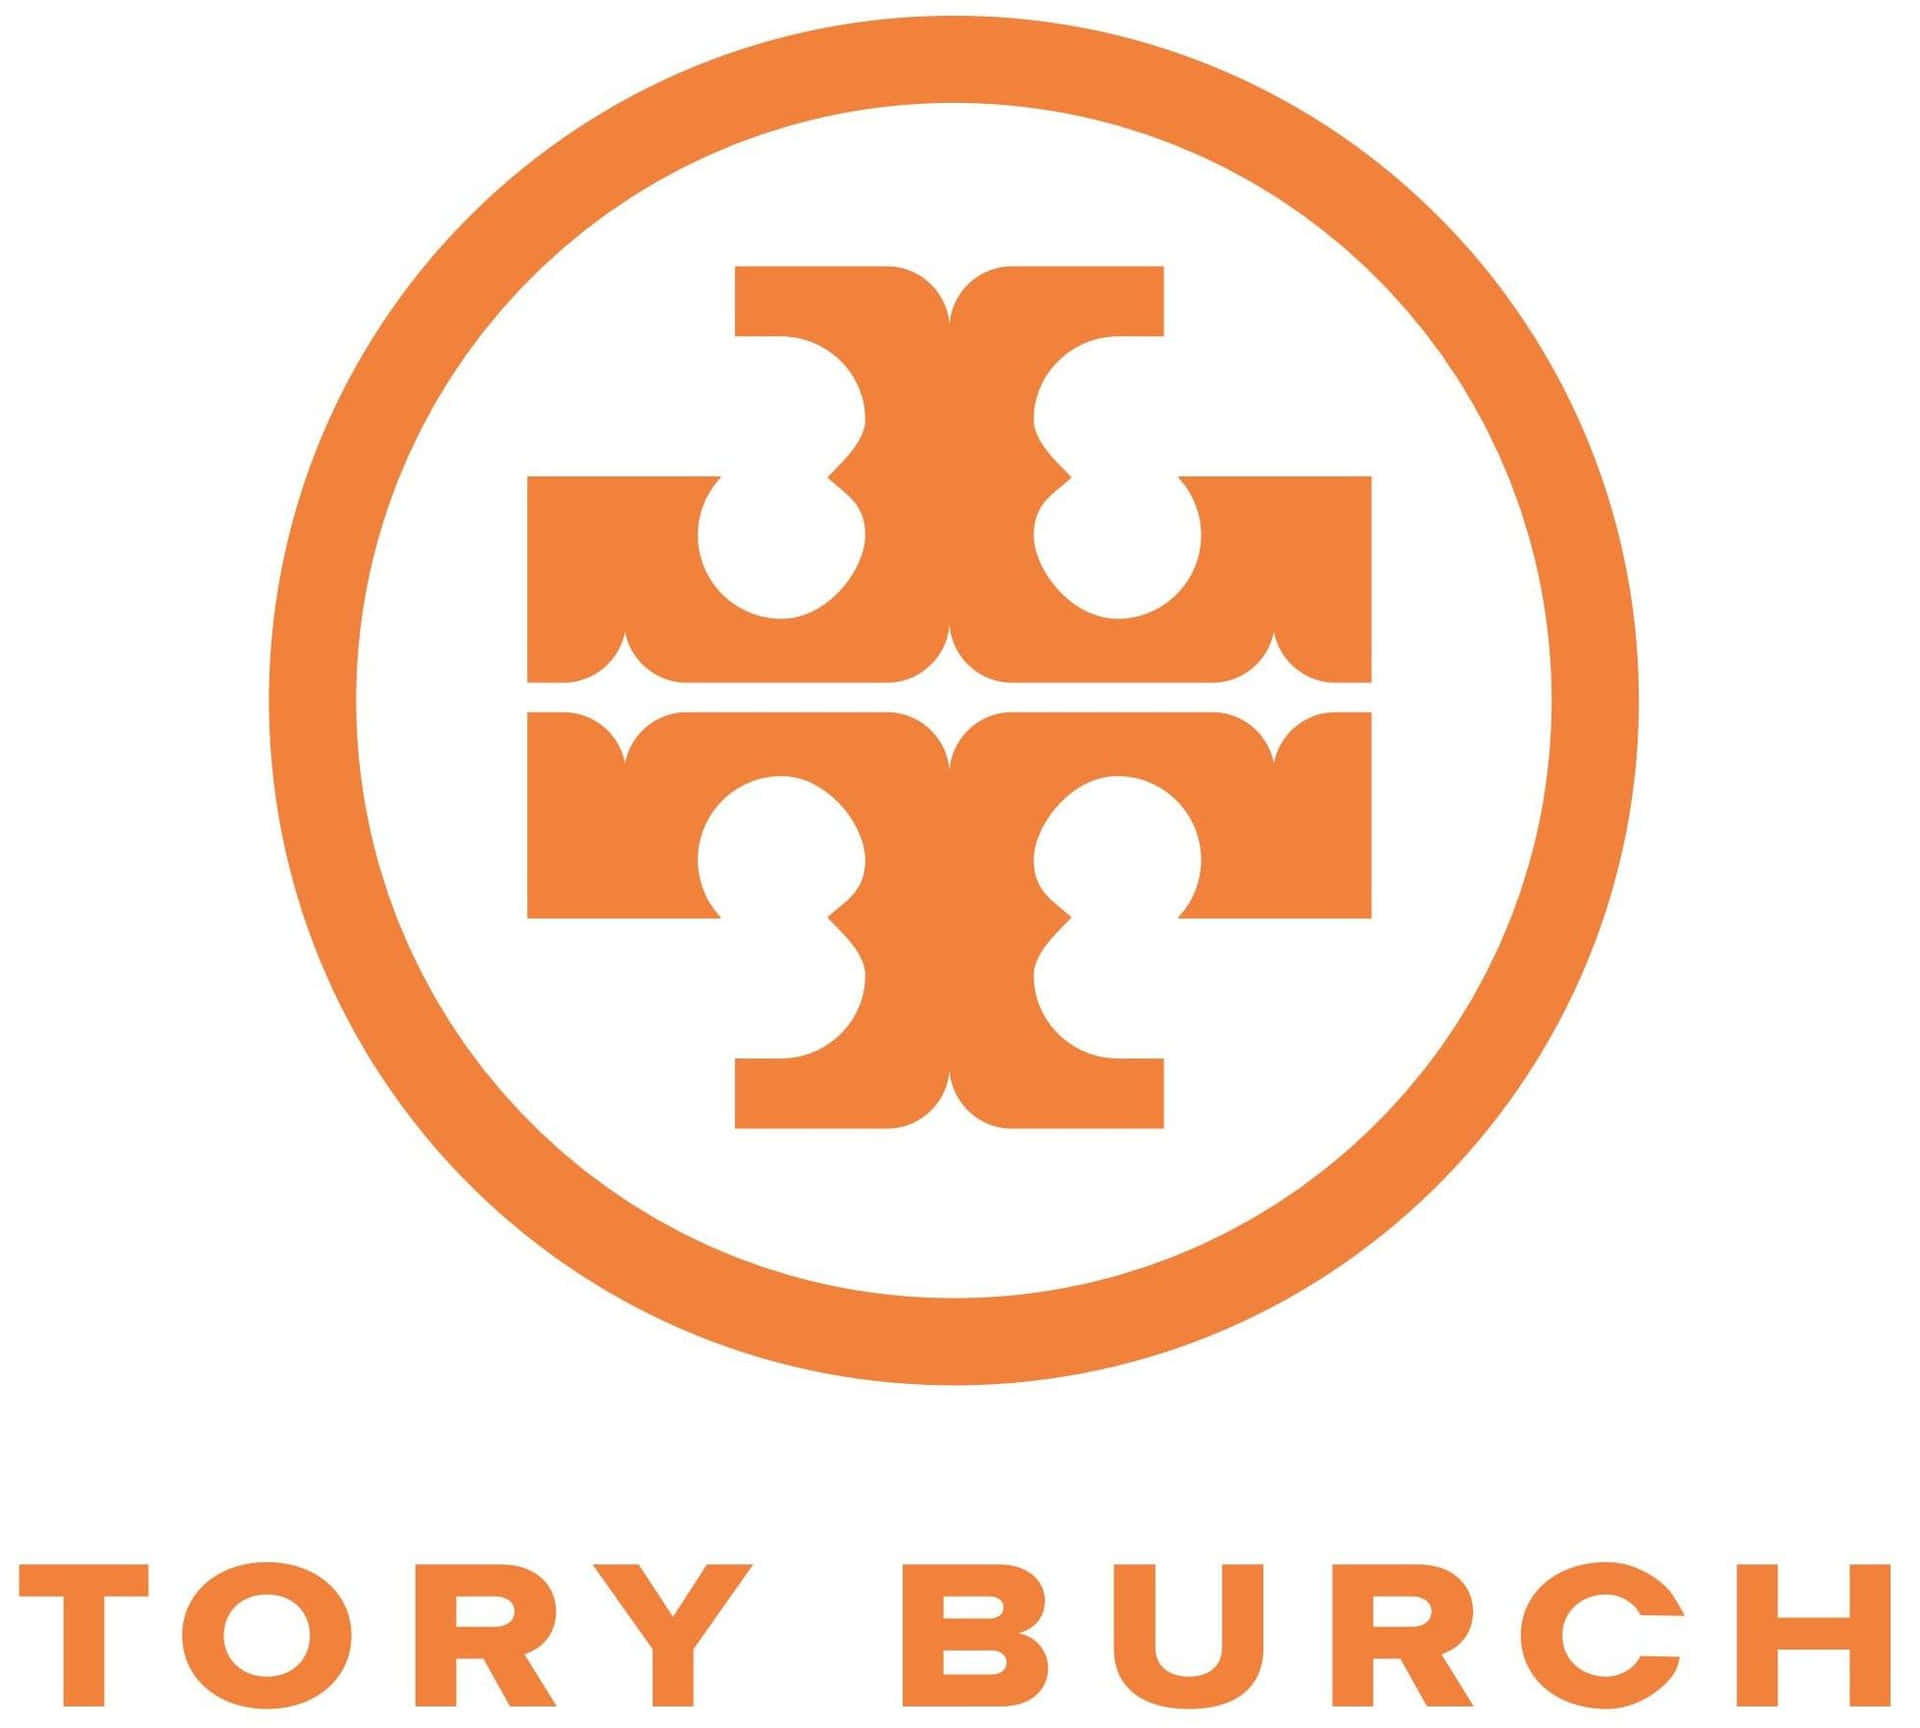 Image  Step Up Your Style with a Tory Burch Ensemble